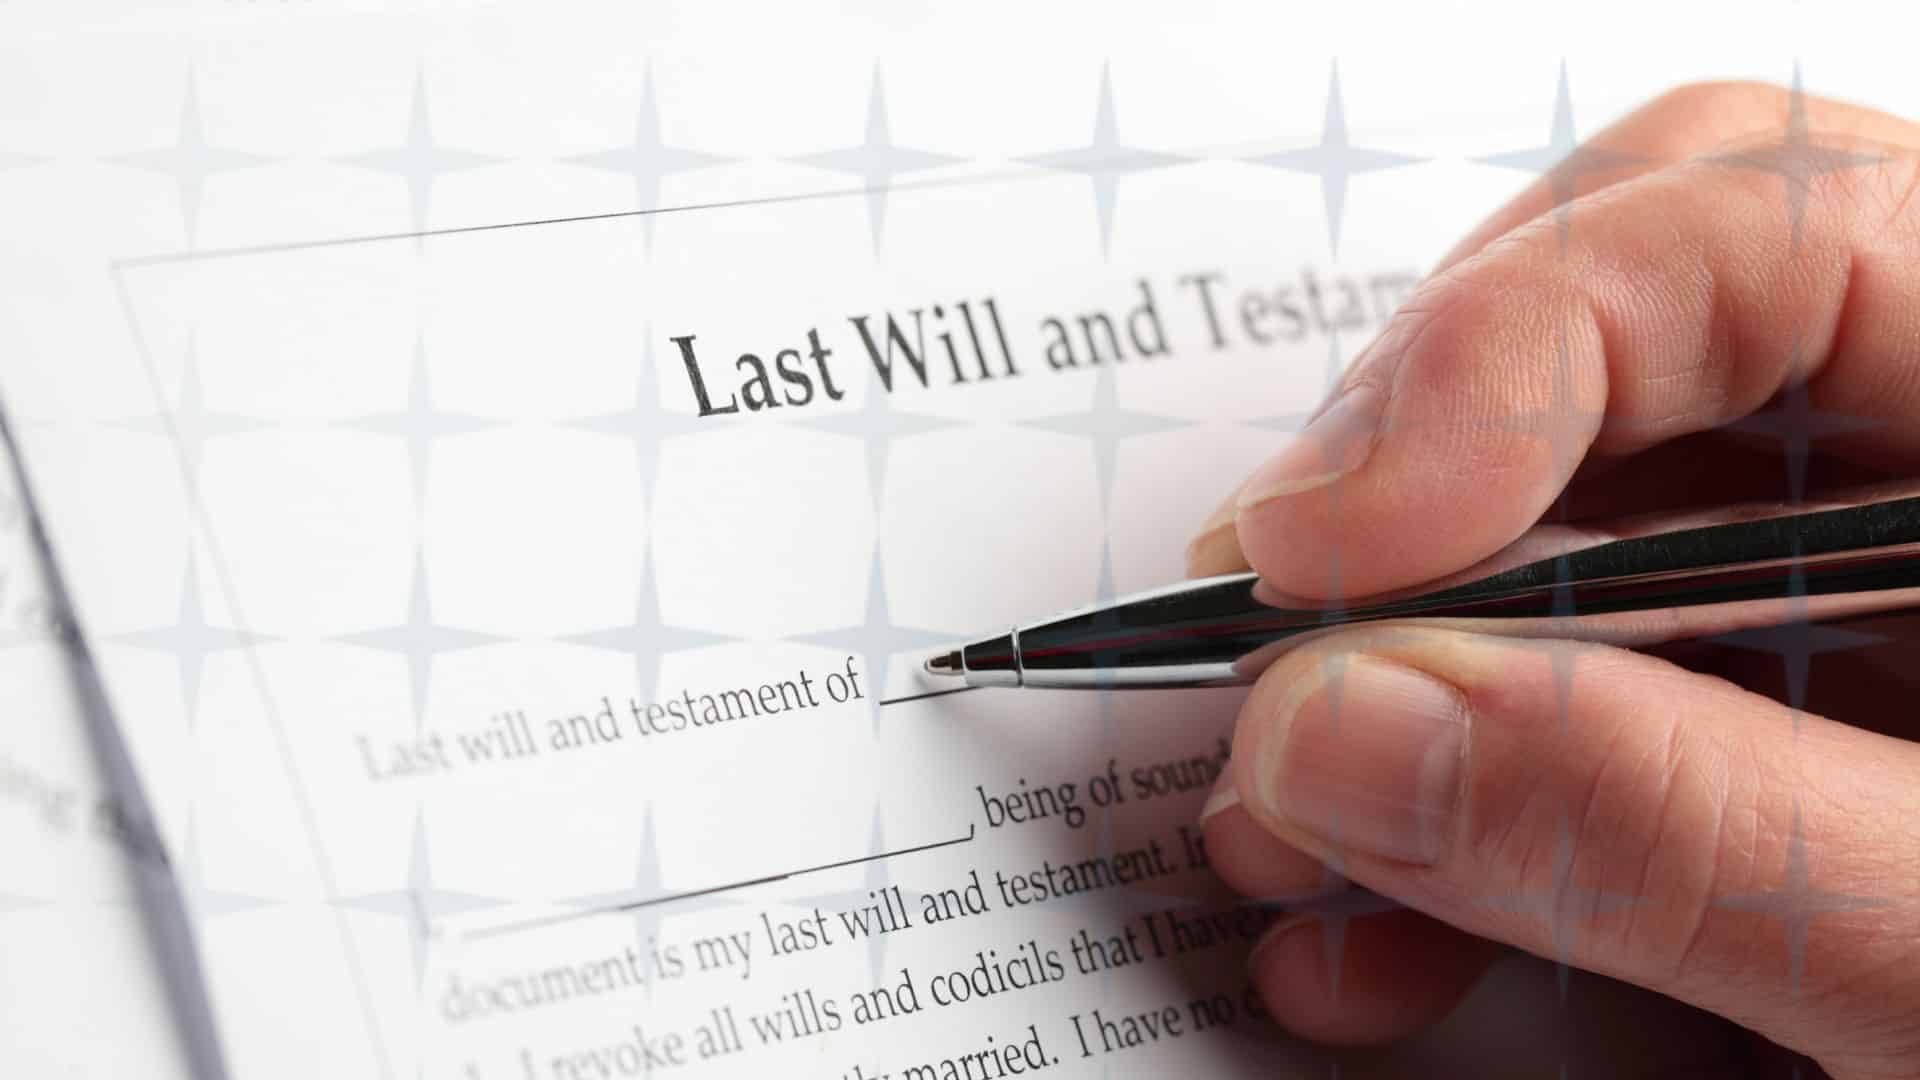 Hamd holding a pen to sign a Will.